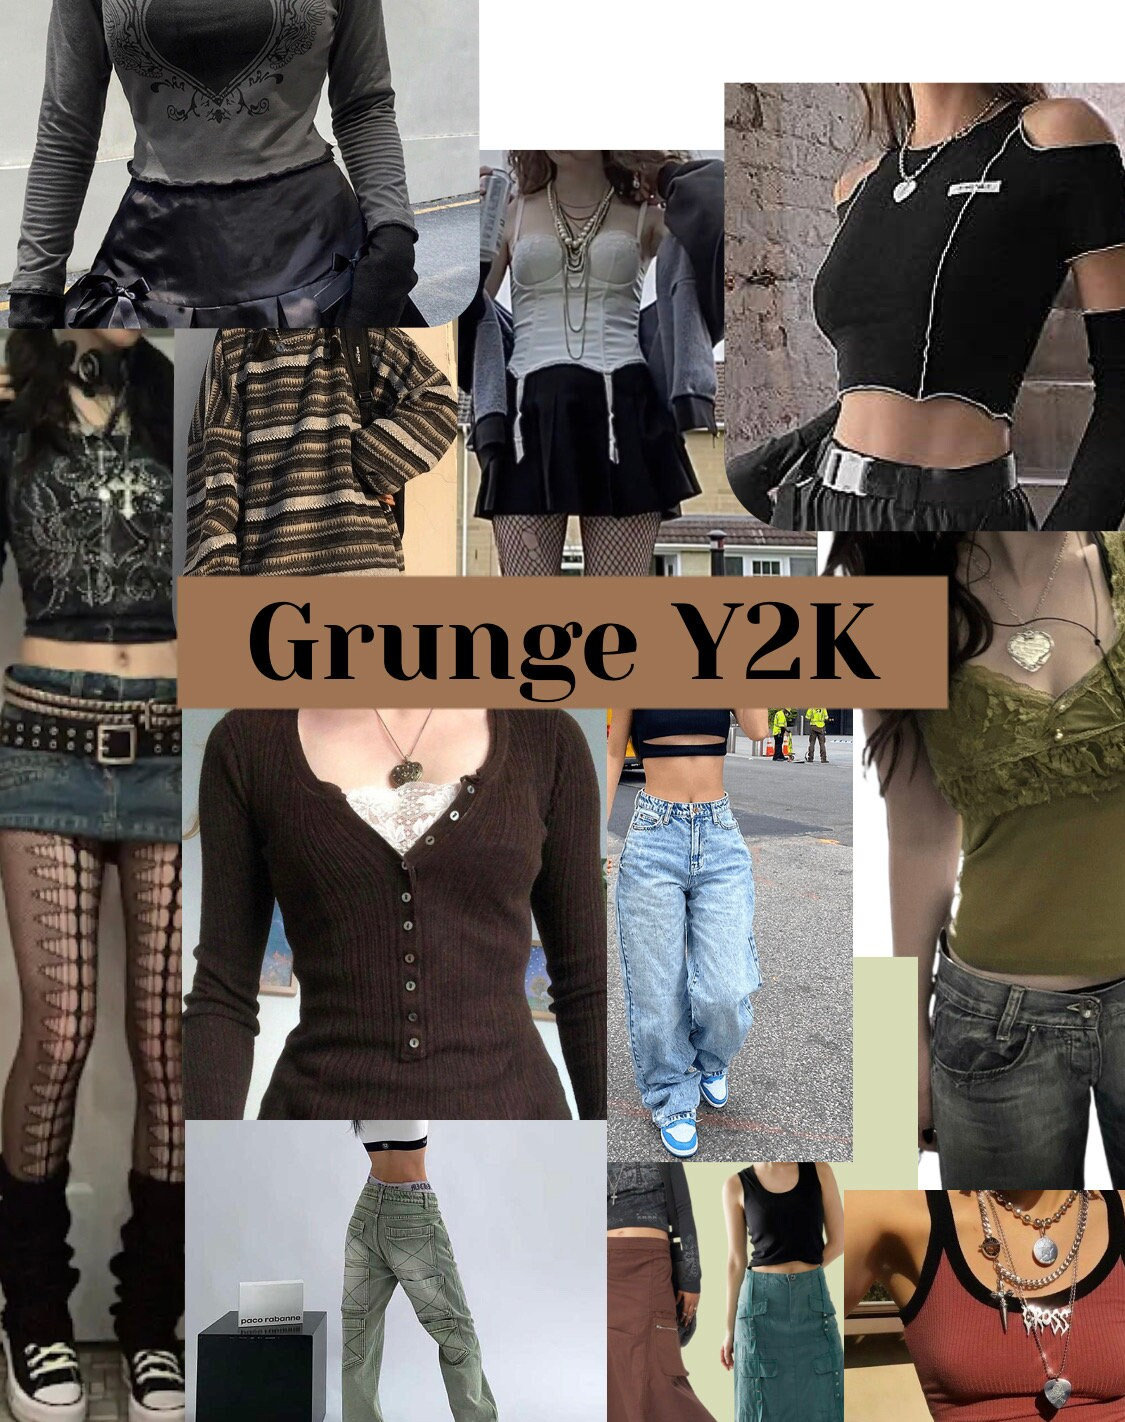 A Complete Guide to the Y2K aesthetic outfits – Boogzel Clothing